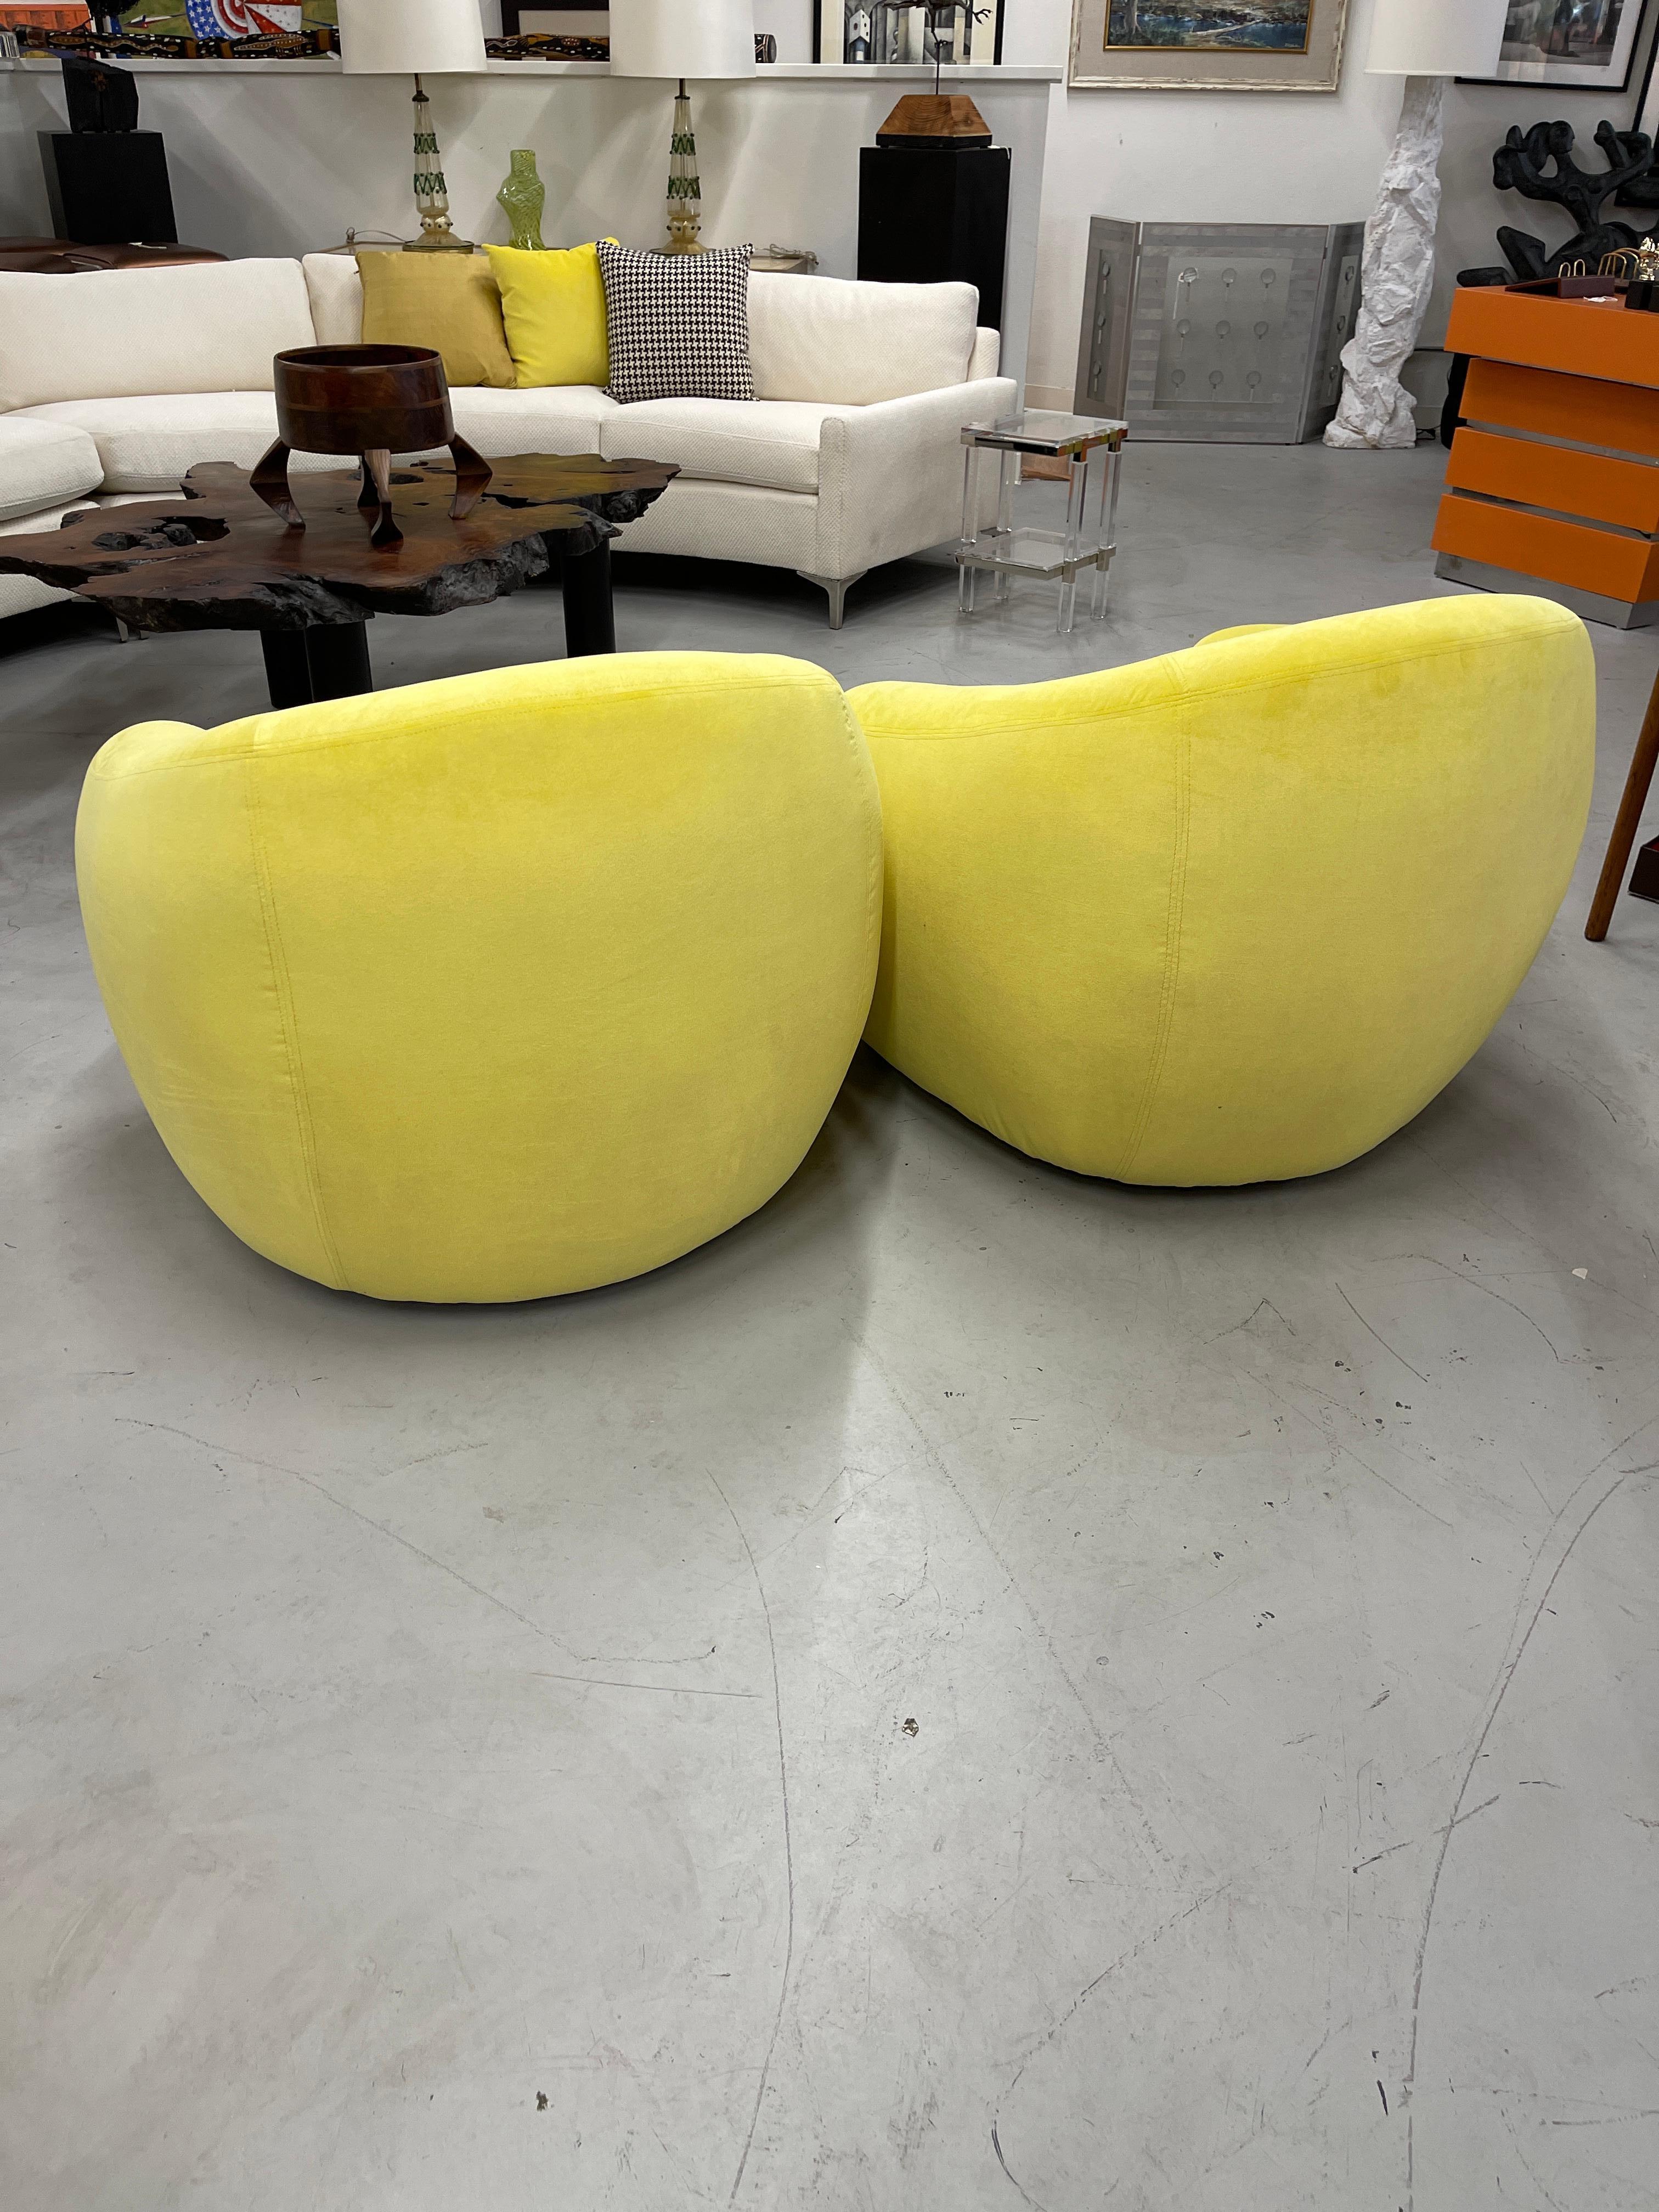 A Rudin Swivel Chairs in Limon Kravet Fabric 8